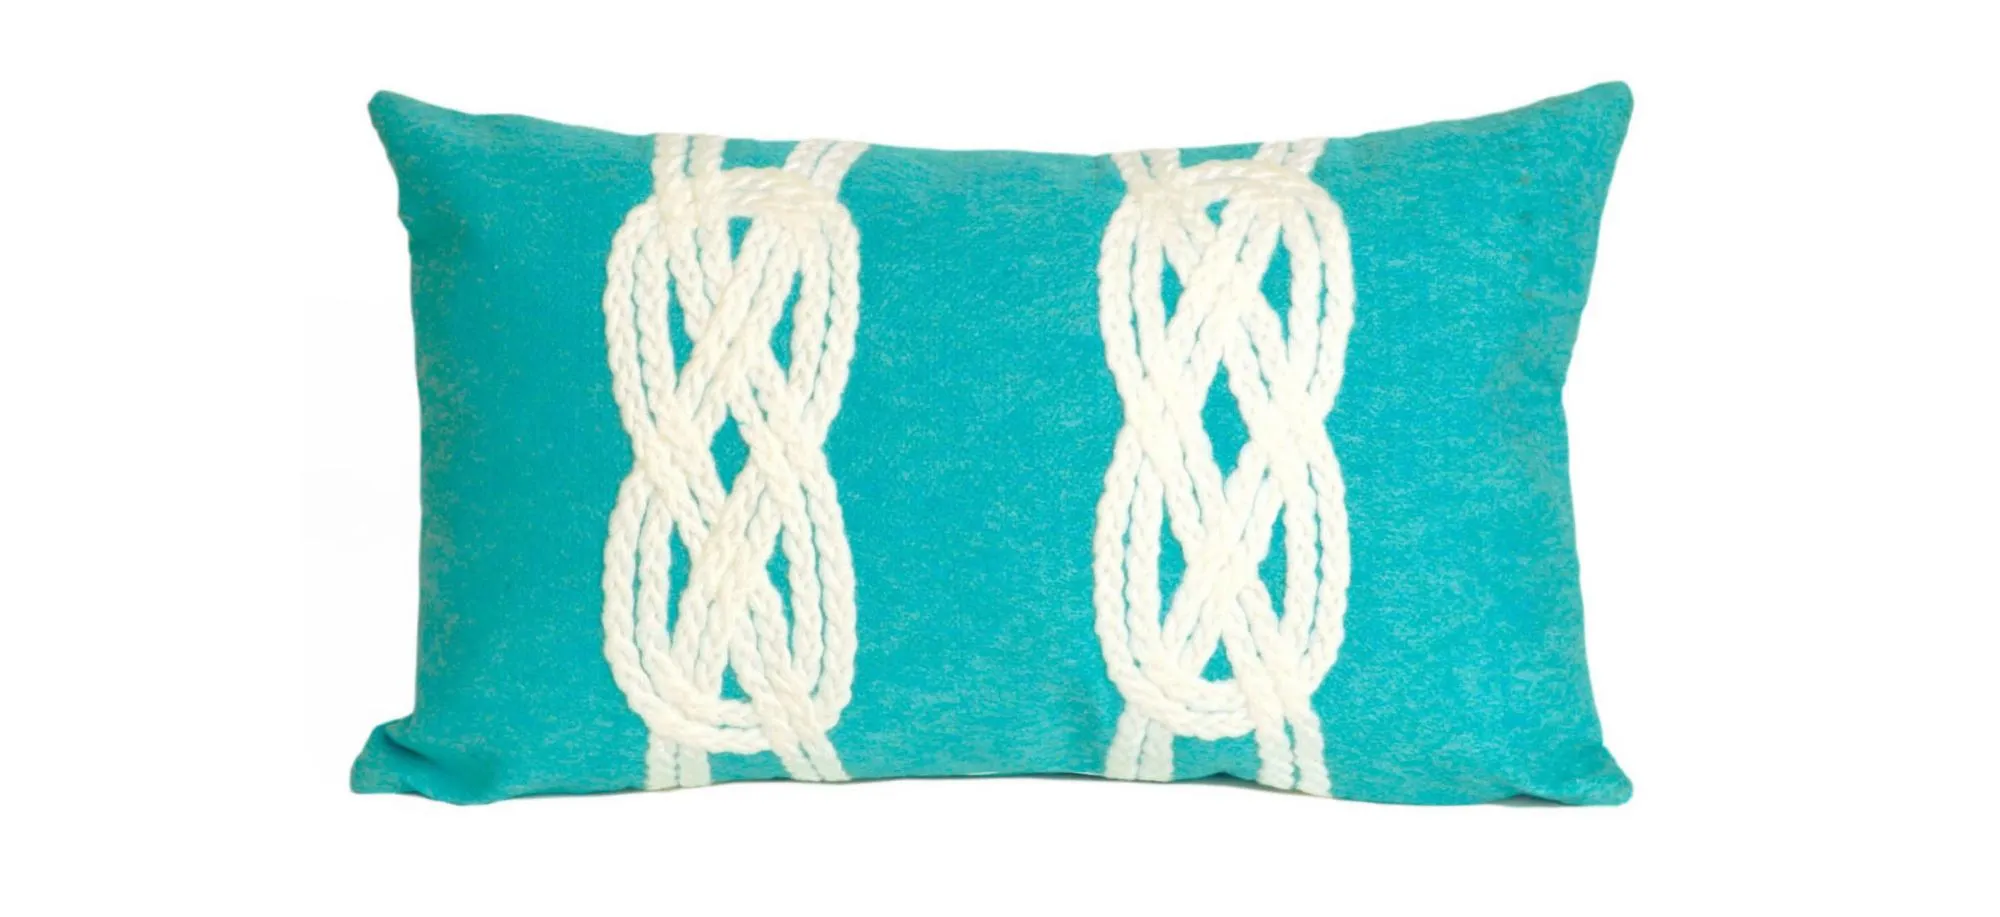 Liora Manne Visions II Double Knot Pillow in Aqua by Trans-Ocean Import Co Inc